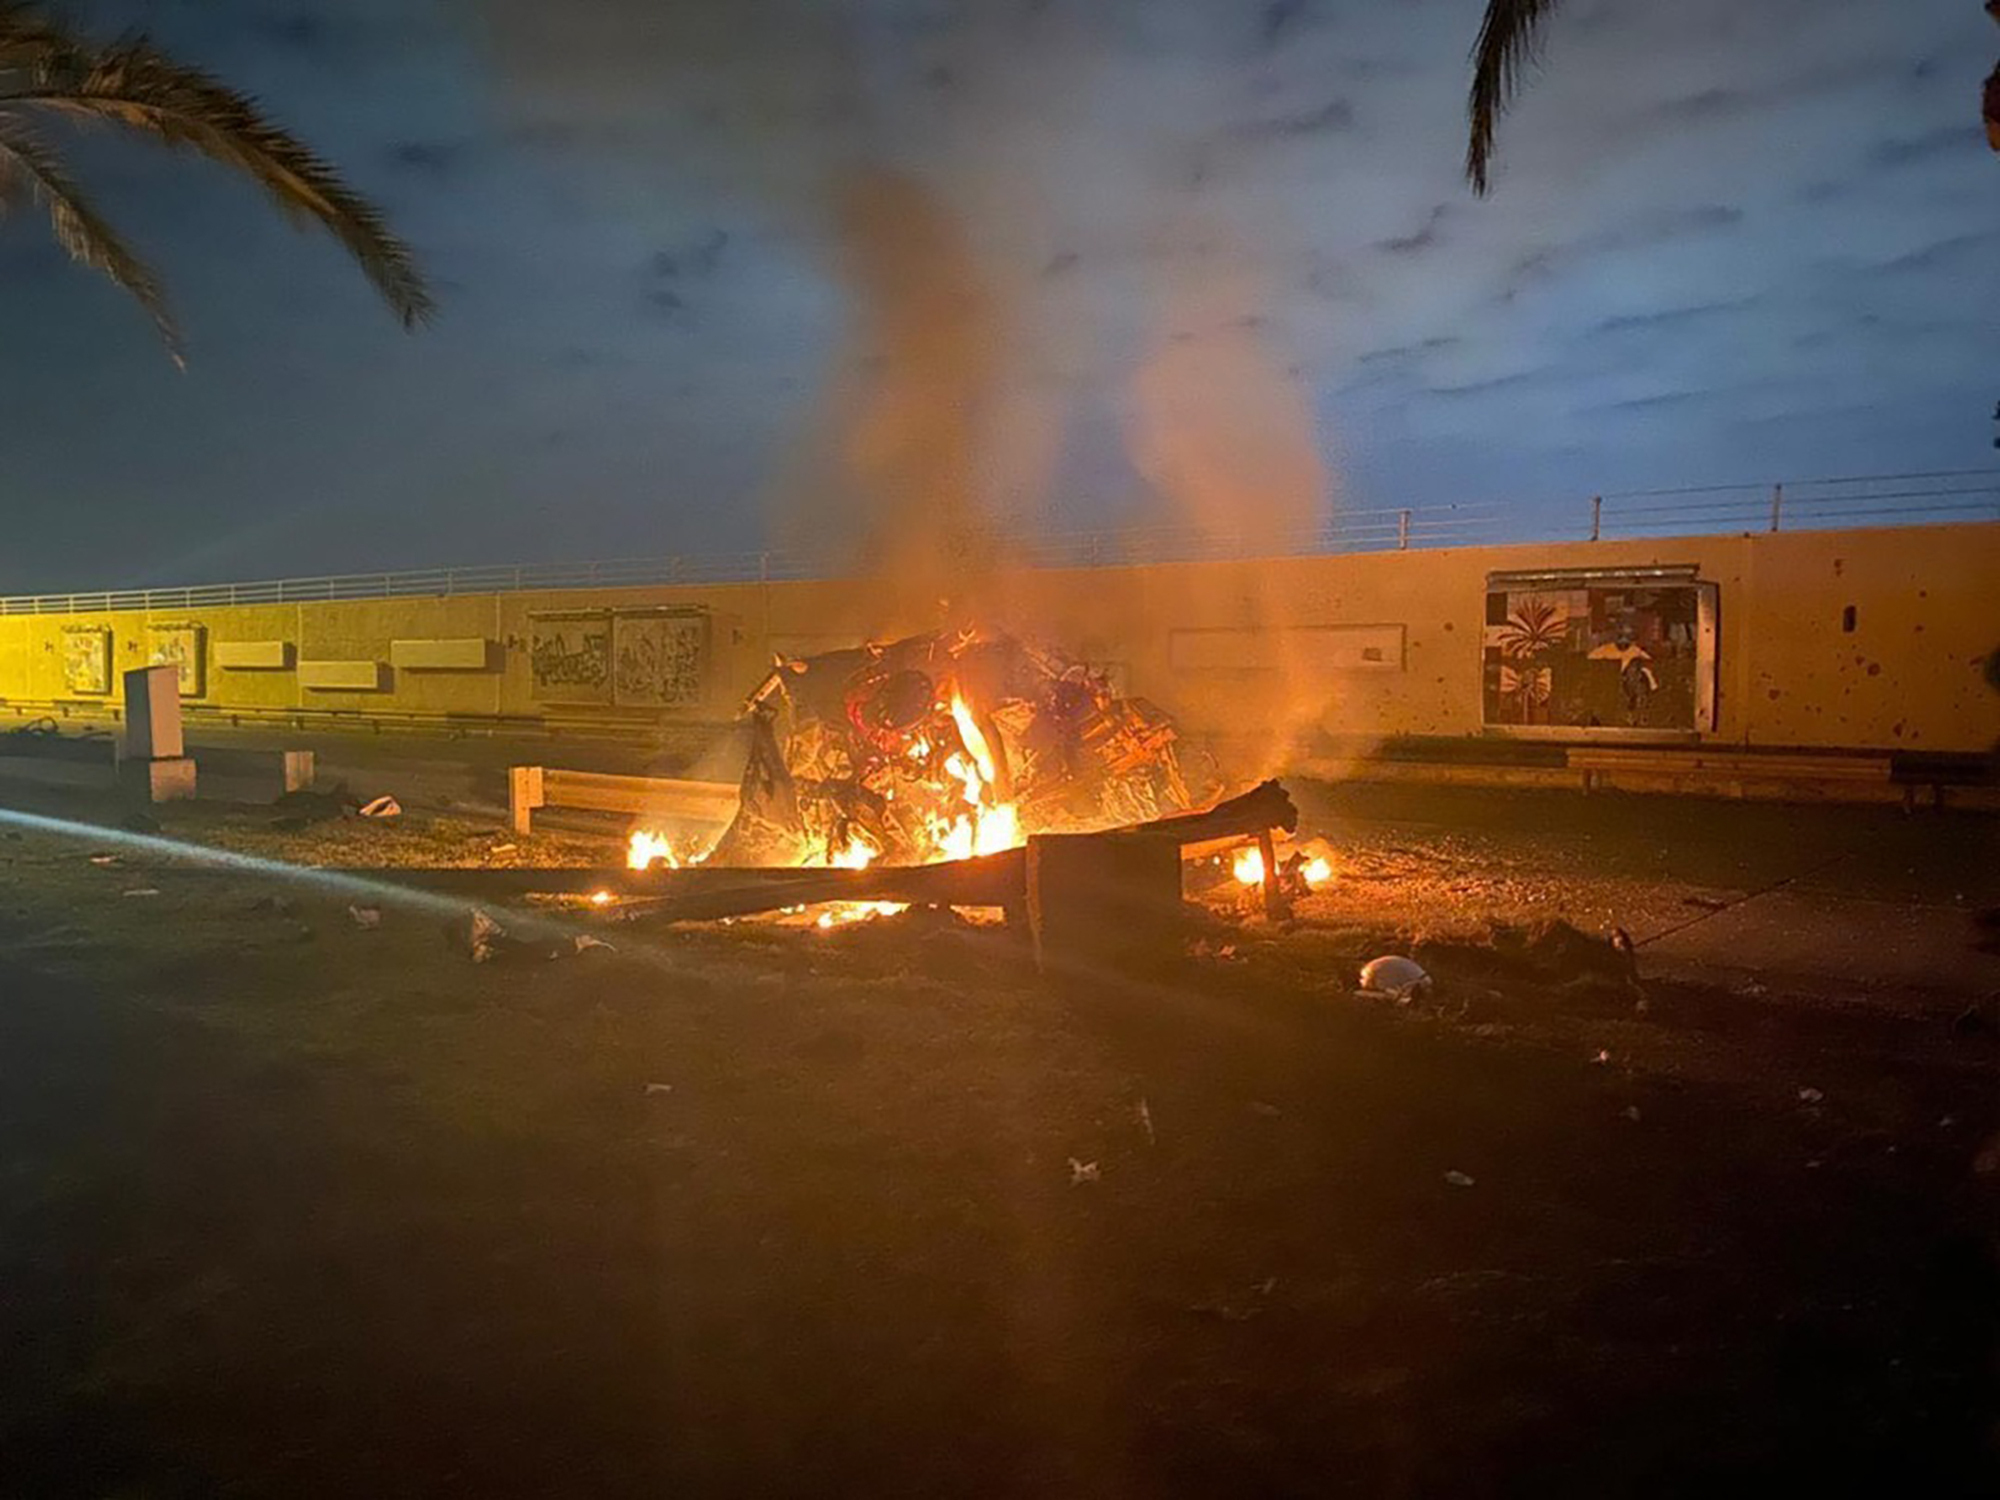 This photo released by the Iraqi Prime Minister Press Office shows a burning vehicle at the Baghdad International Airport following an airstrike in Baghdad, Iraq, early Friday.